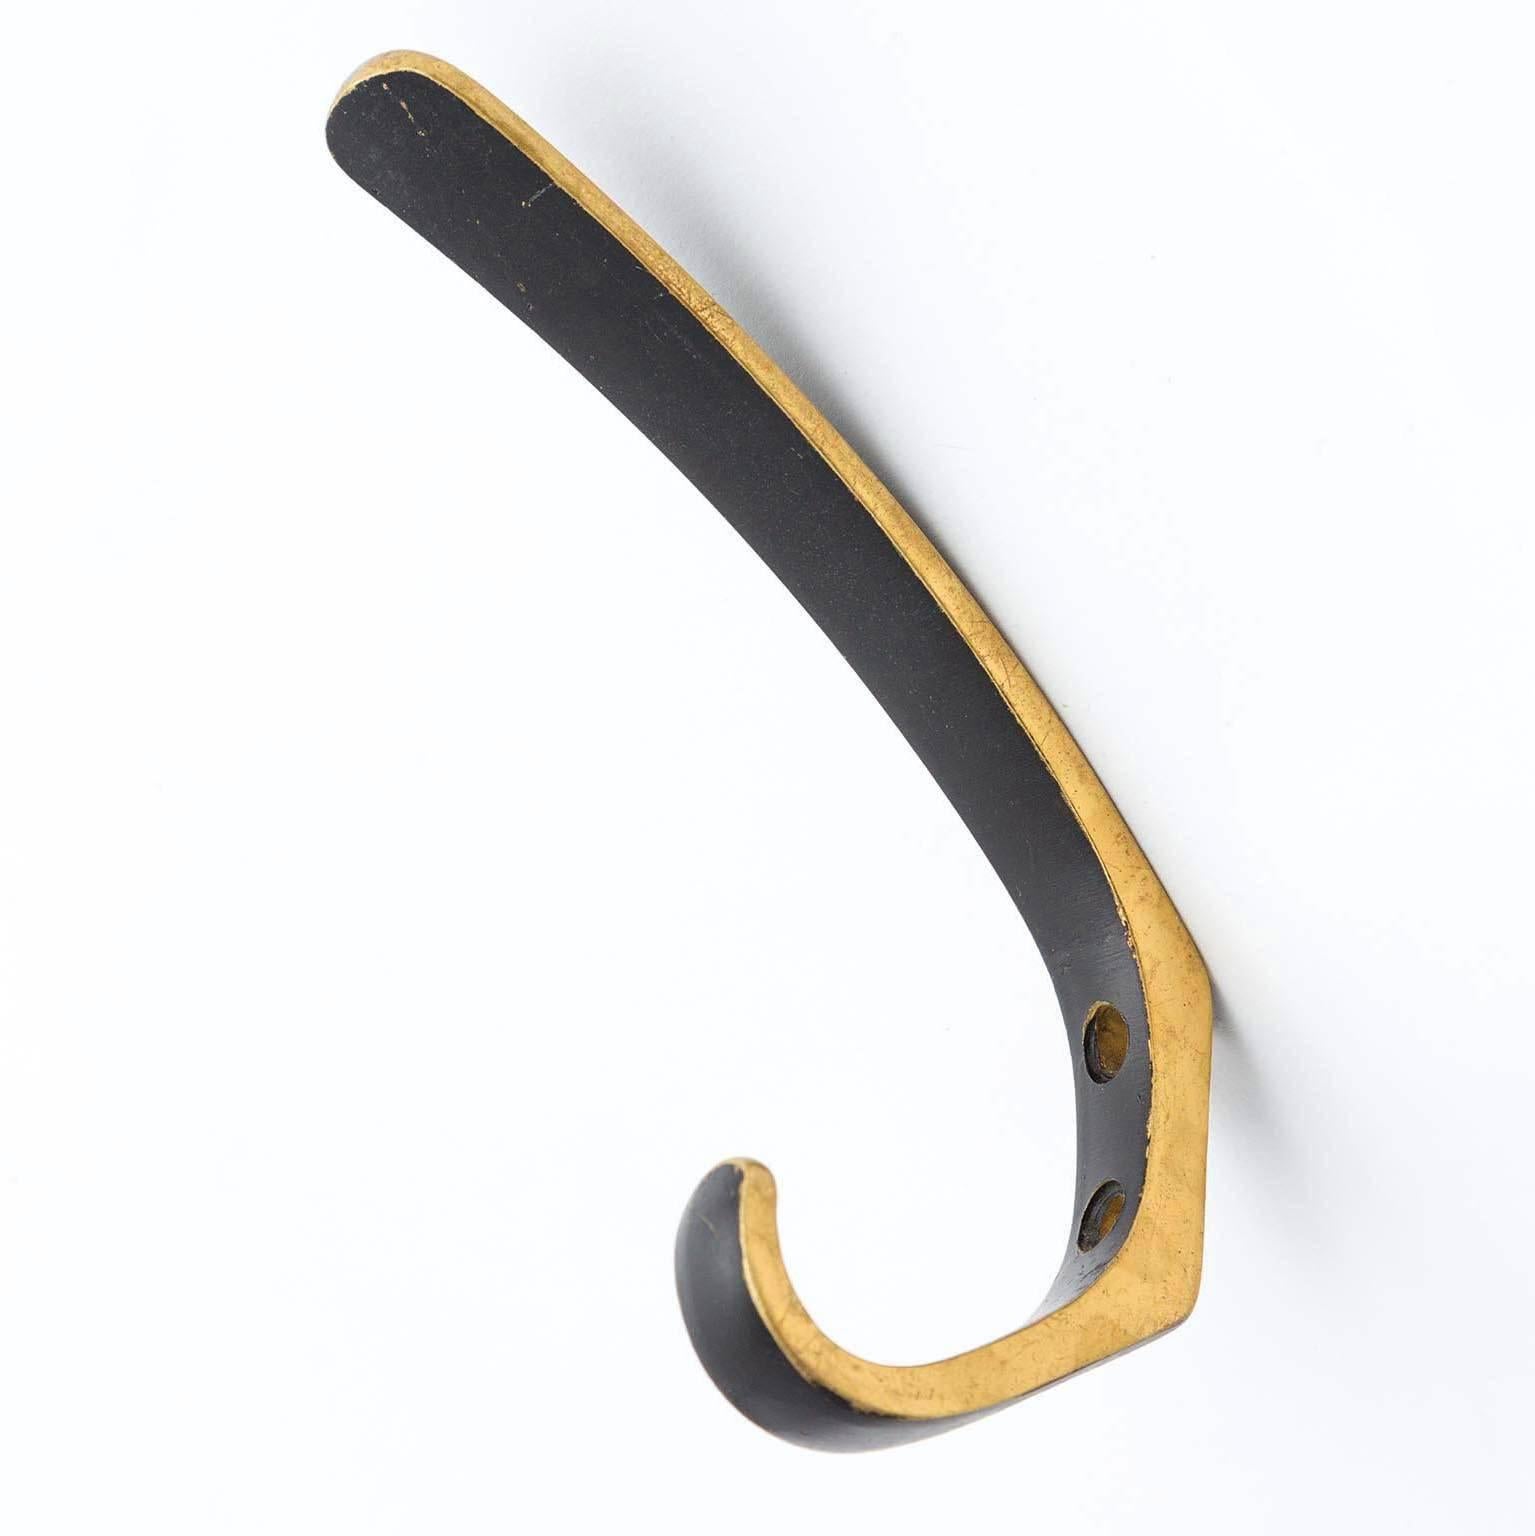 One of four beautiful Austrian brass hooks by Hertha Baller, Austria, manufactured in midcentury (late 1950s or early 1960s). 
They are made of blackened and partly polished brass with lovely patina.